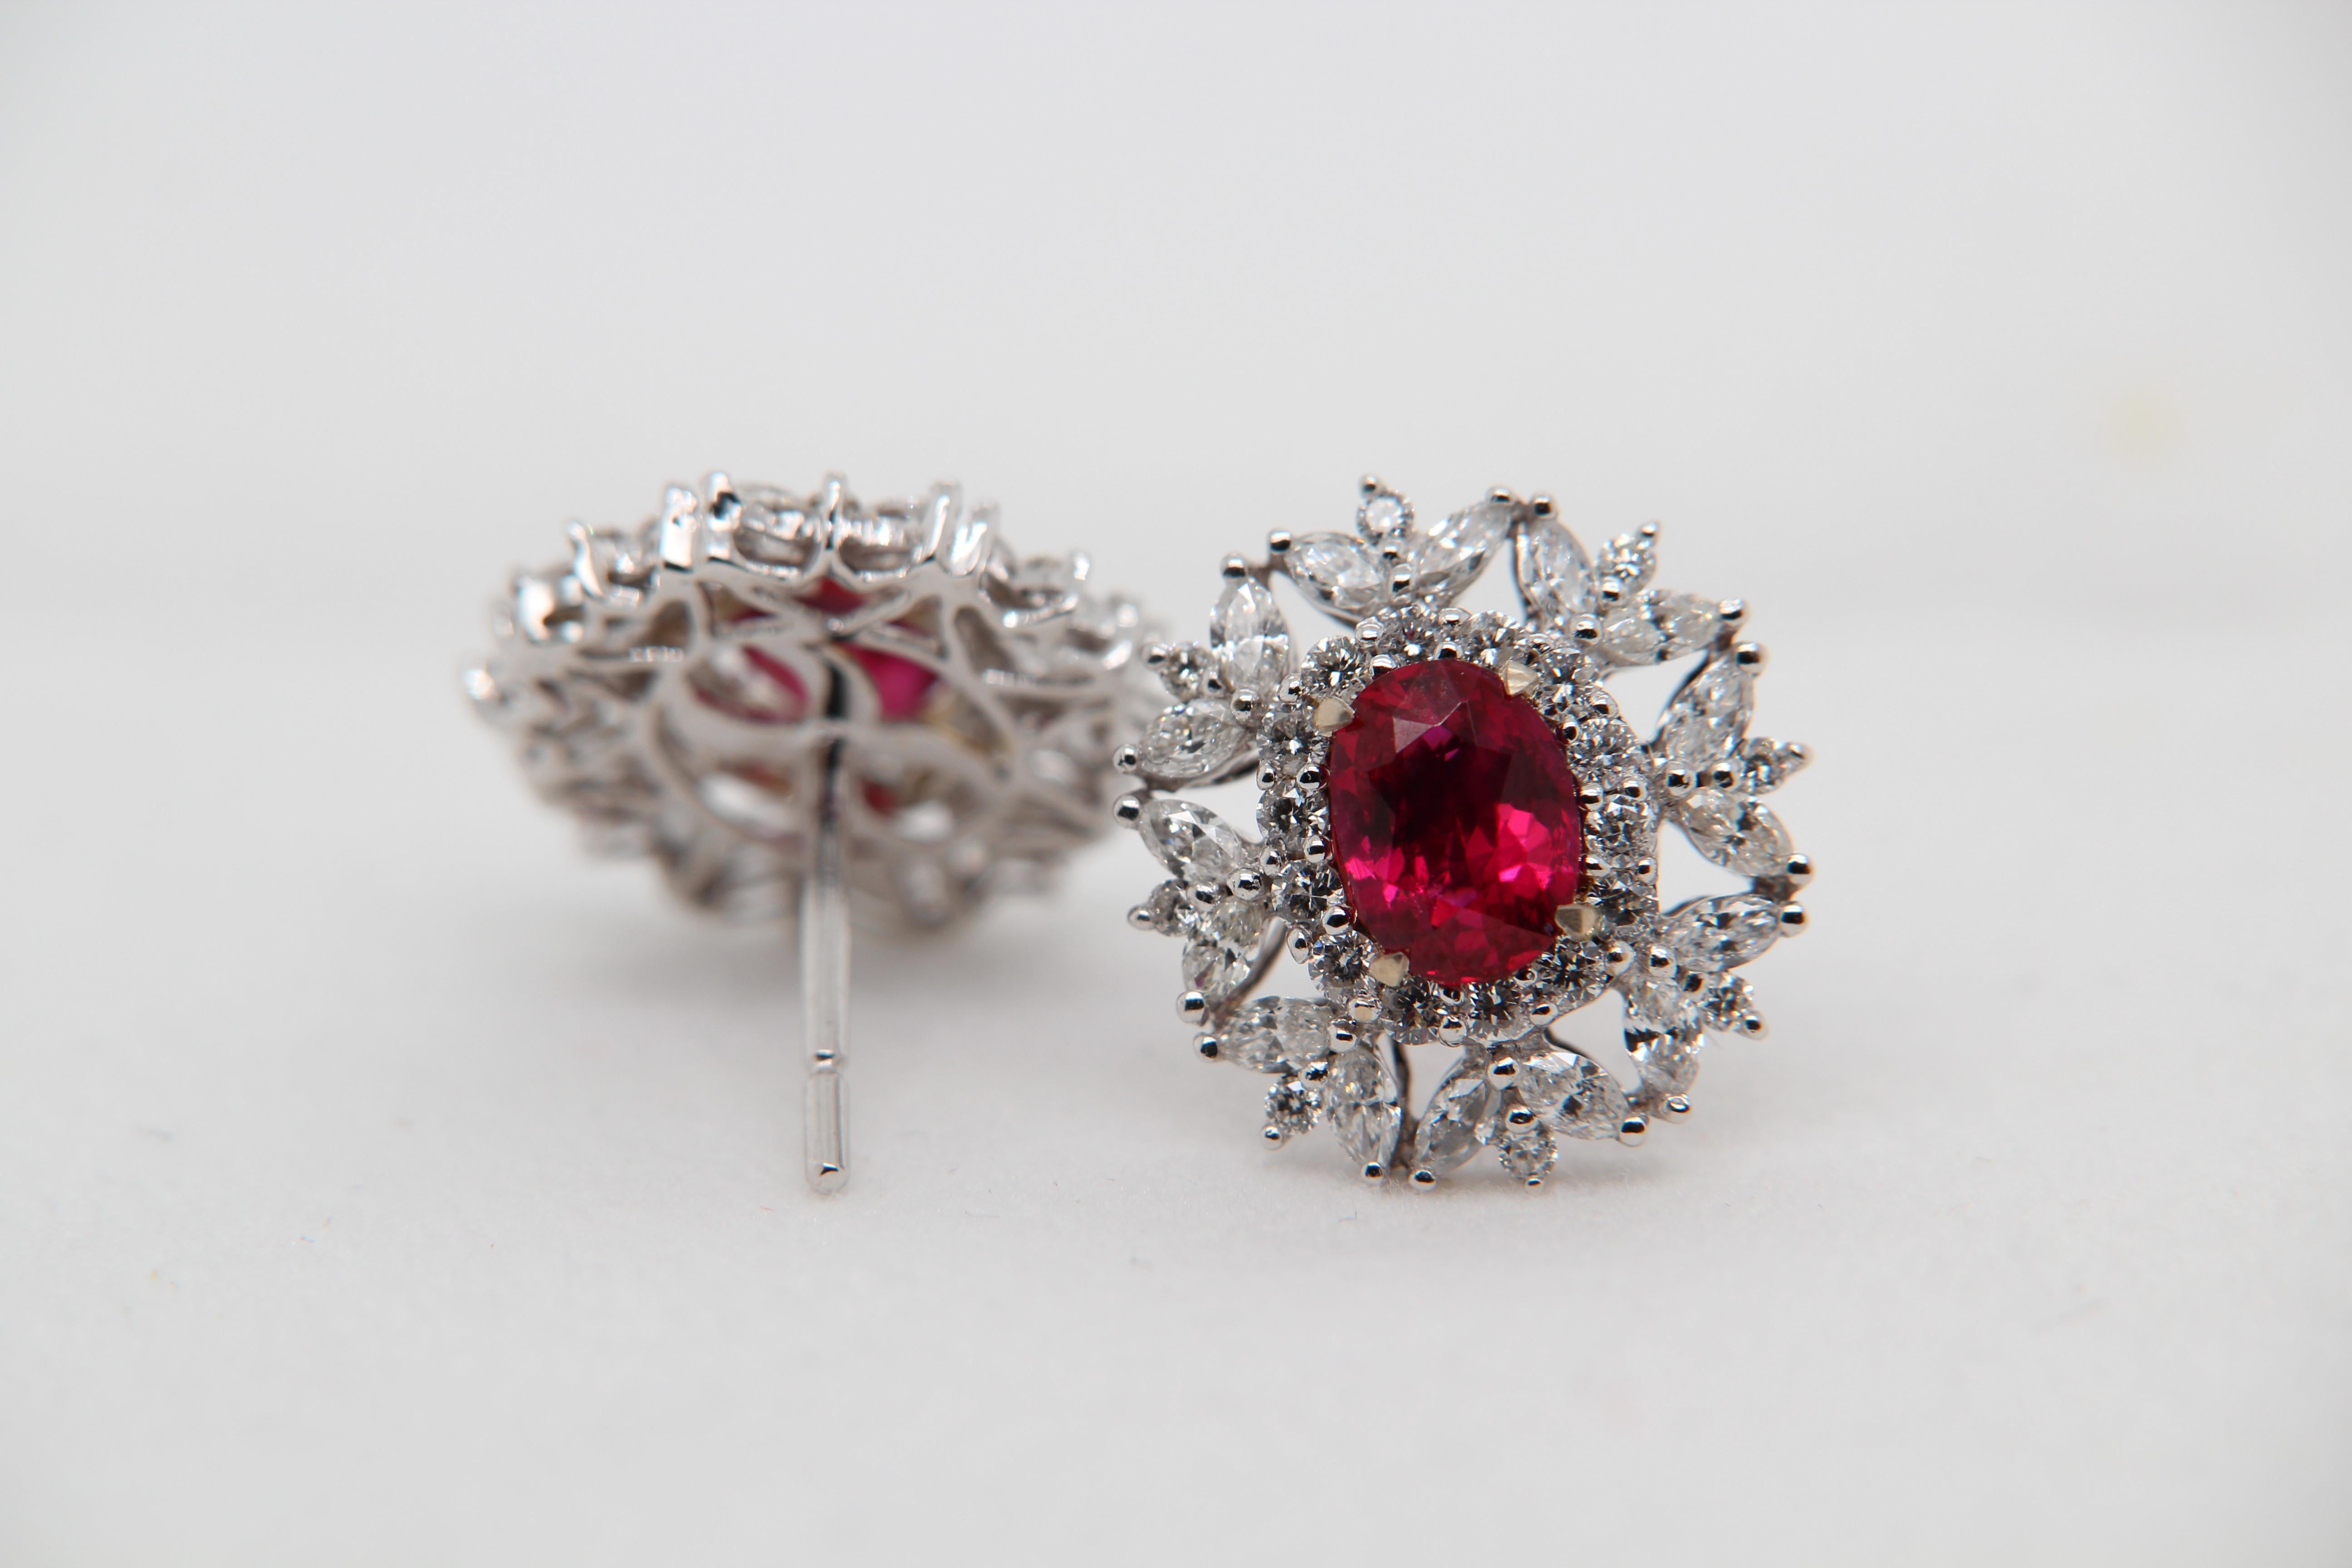 A new 2.09 carat Burmese ruby earring mounted with diamonds in 18 Karat gold. The ruby weighs 1.05 and 1.04 carats and are certified by Gem Research Swisslab (GRS) as natural, no heat, and 'Vivid Red Pigeon's Blood'. The total diamond weight is 1.61